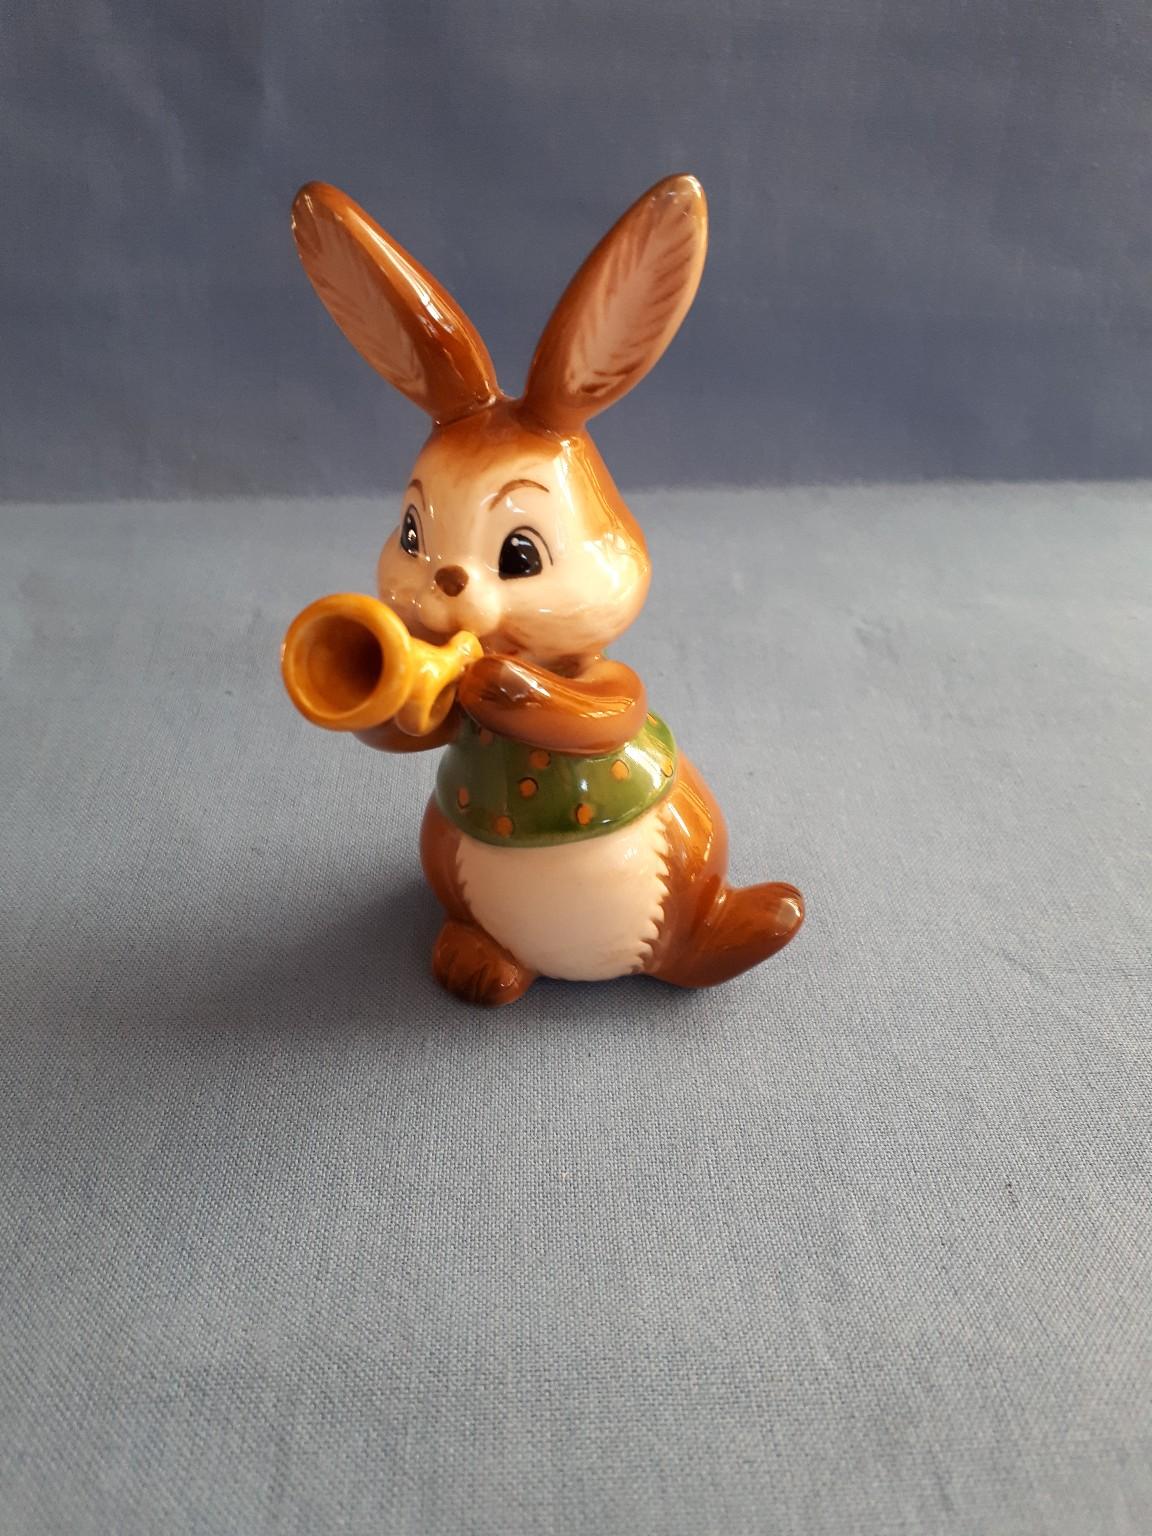 Goebel Hase mit Trompete in 76863 Herxheim for €22.00 for sale | Shpock